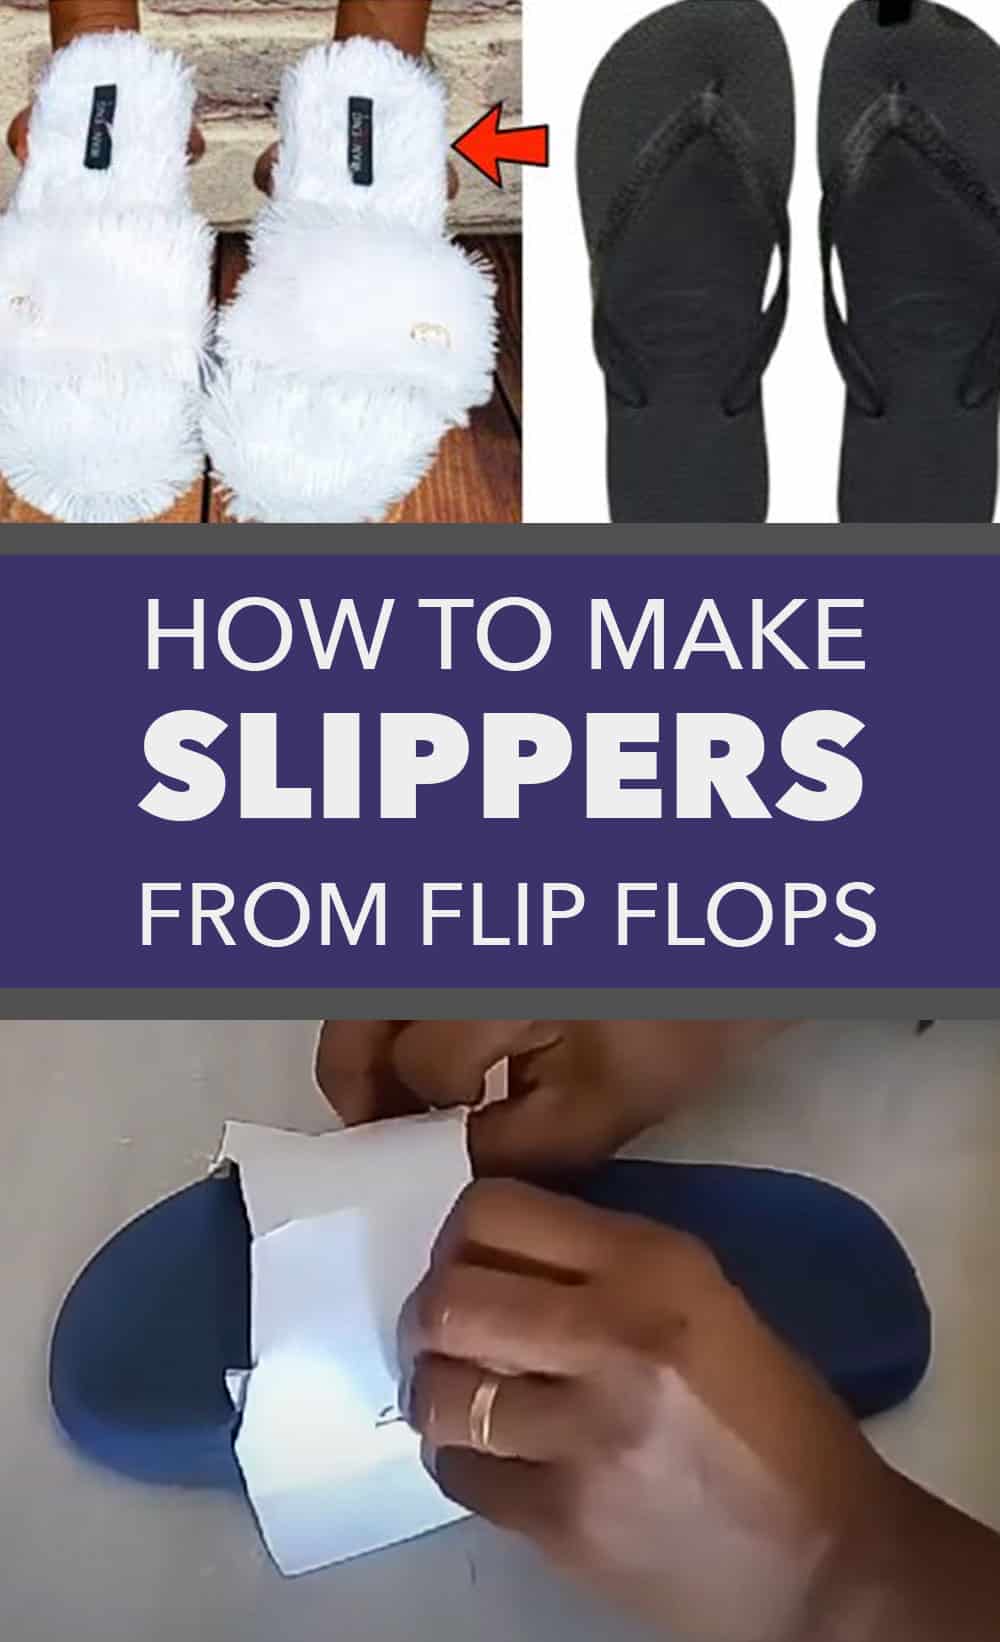 How to Make Slippers From Flip Flops